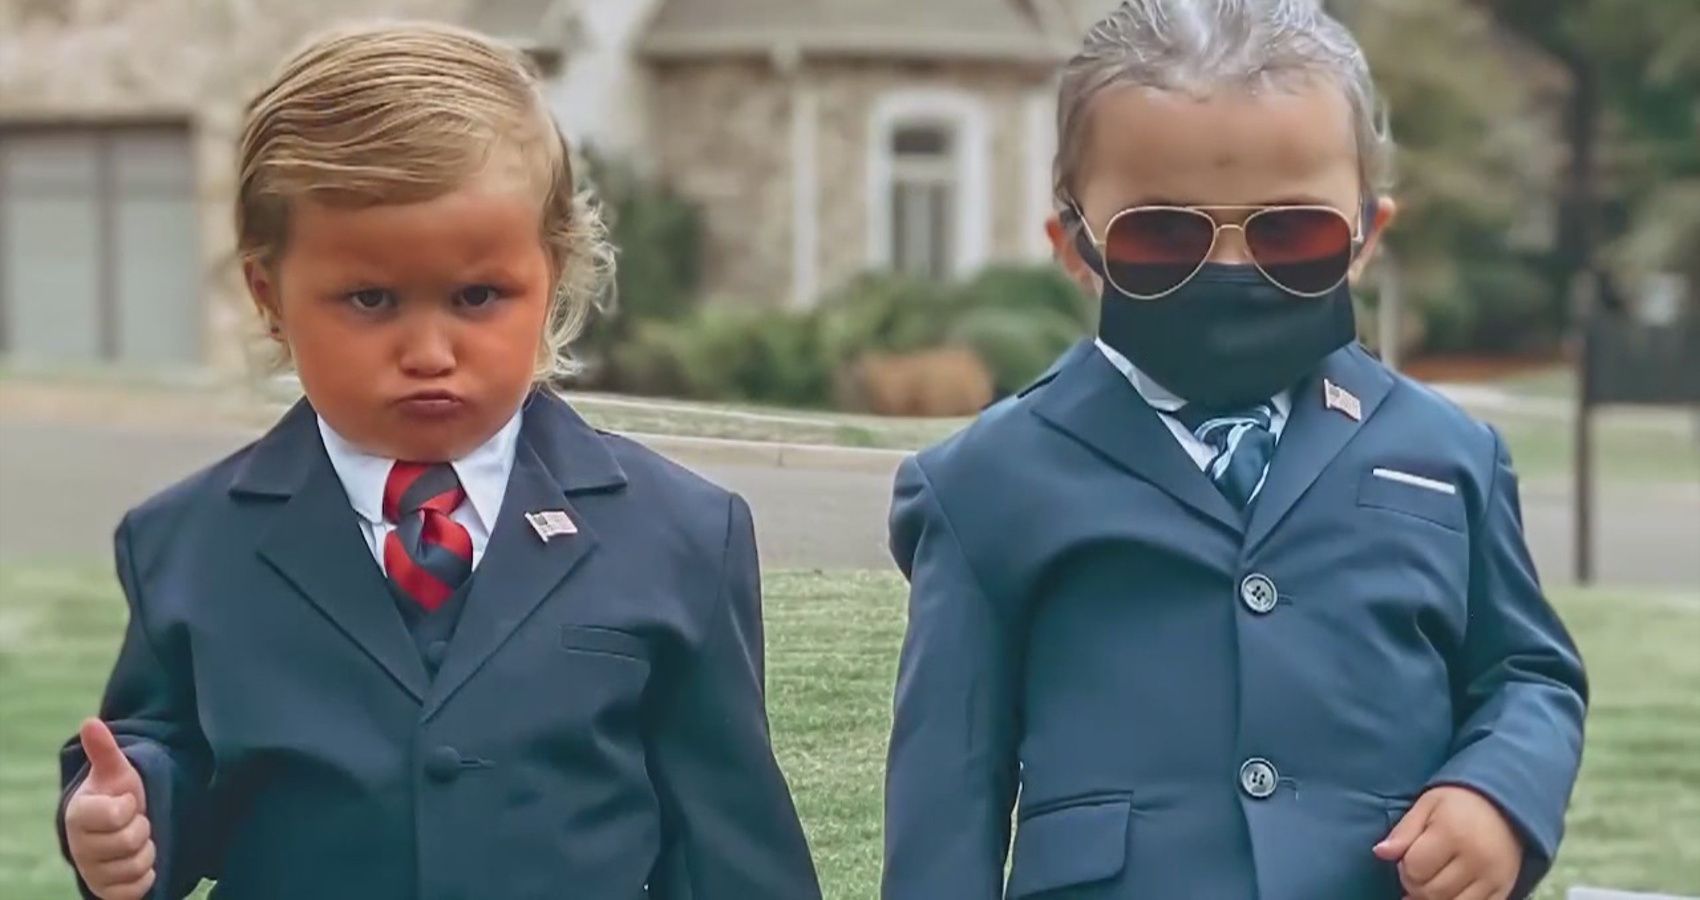 Twin four year olds dress as Trump and Biden